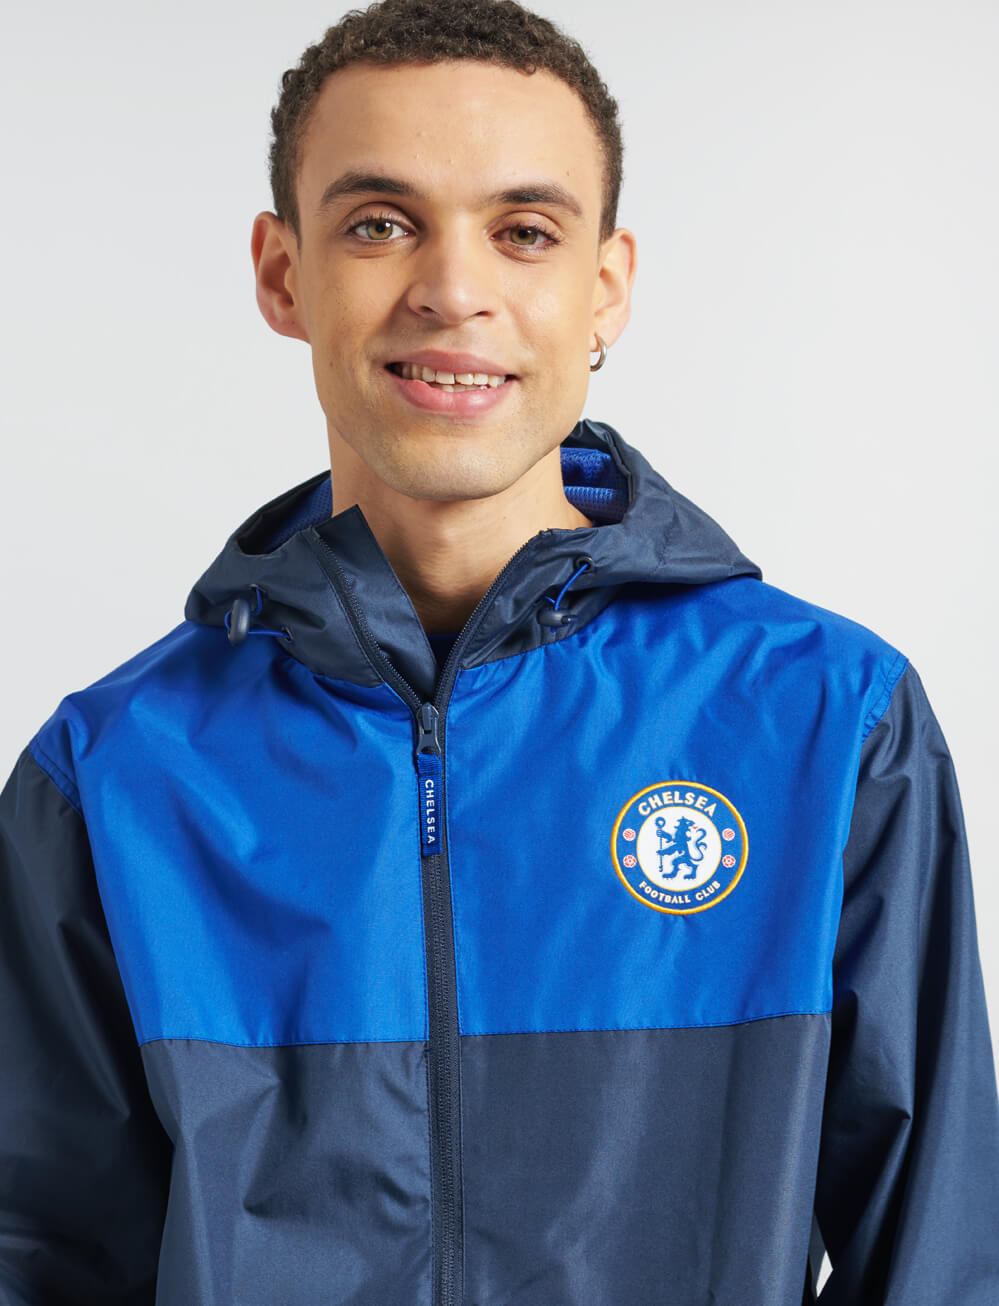 Official Chelsea Shower Jacket - Navy - The World Football Store